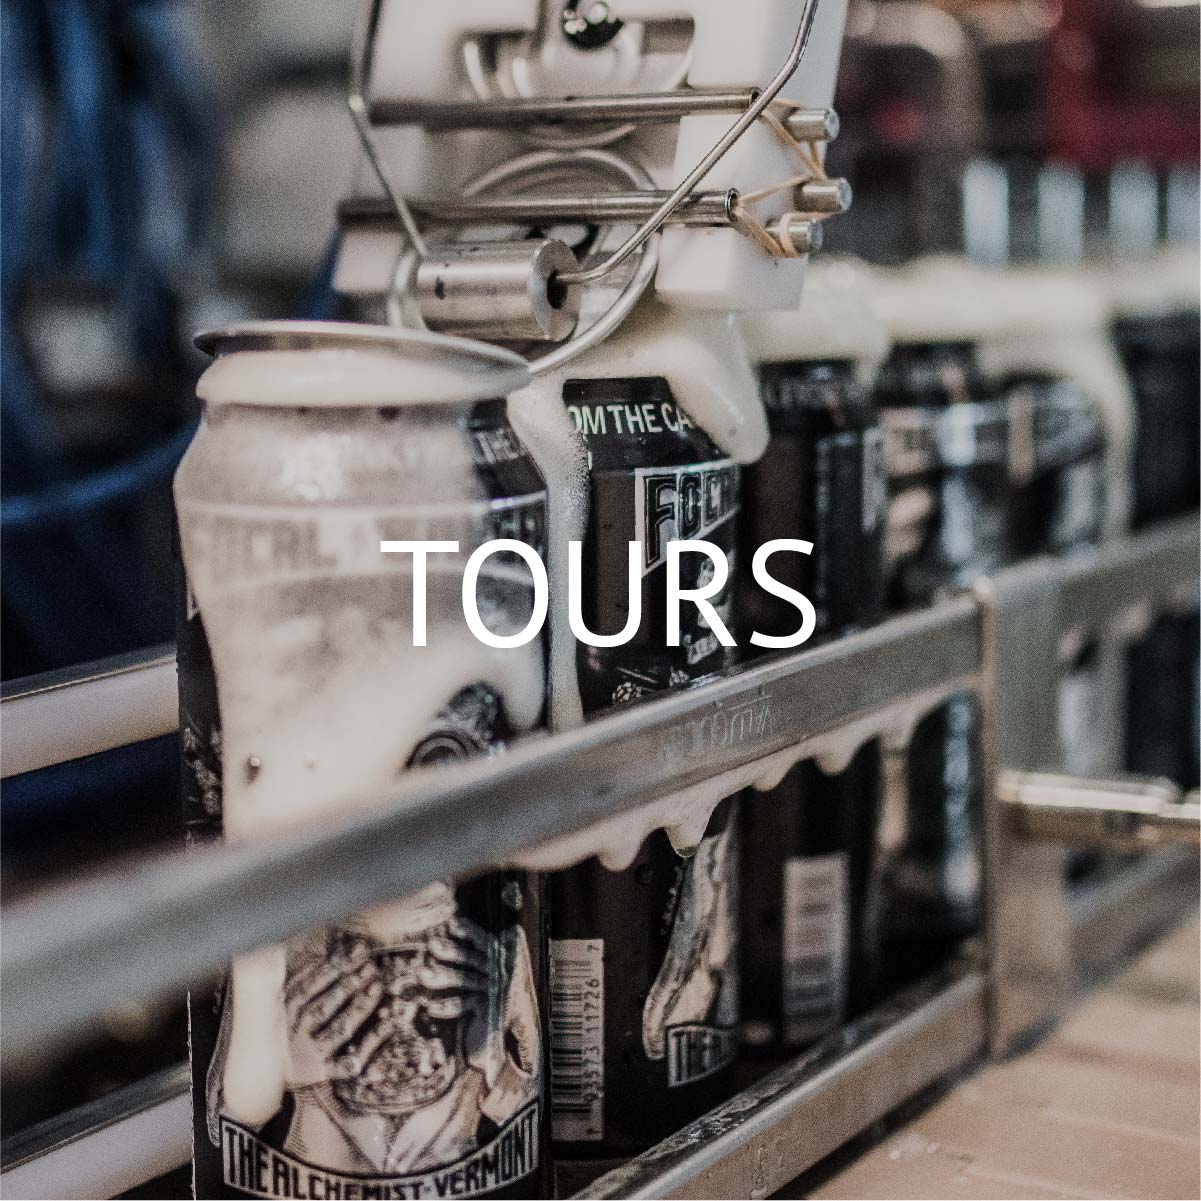 Click to learn more about Brewery Tours at the Alchemist